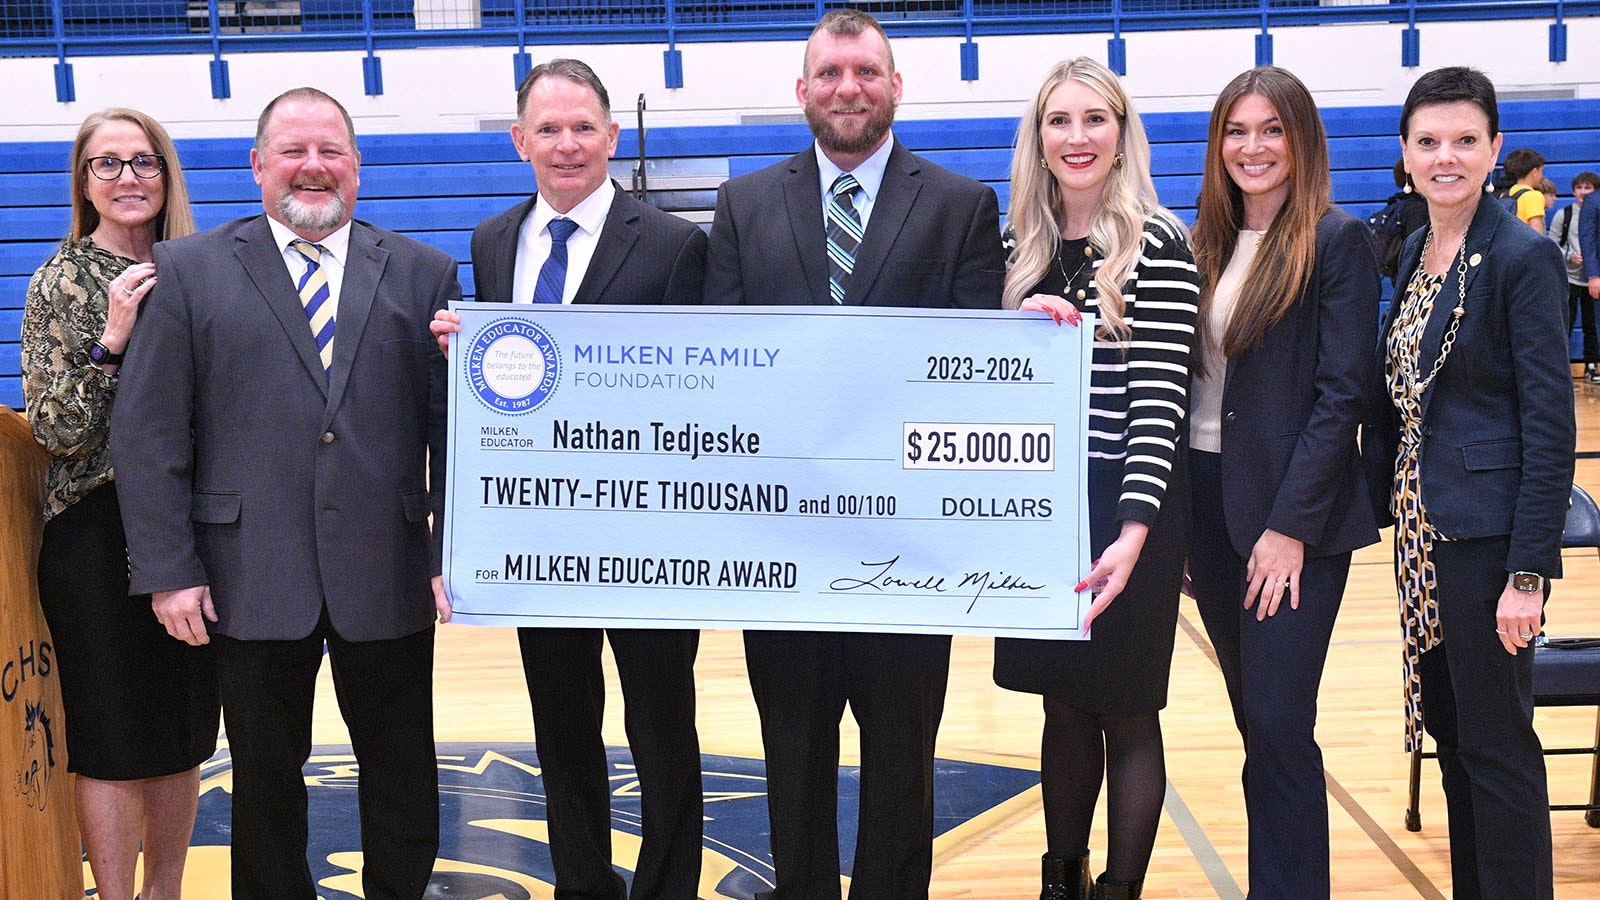 Milken Award recipient Nathan Tedjeske gets a hand with his oversized $25,000 check from visiting dignitaries and colleagues. From left, Wyoming Department of Education Communications Director Linda Finnerty; Park County School District #6 Assistant Superintendent Tim Foley; Park County School District #6 Superintendent Vernon Orndorff; recipient Nathan Tedjeske (WY '23); Wyoming Superintendent of Public Instruction Megan Degenfelder; Wyoming Department of Education Teacher Leadership and Awards Consultant Madison Lacey; and Milken Educator Awards Vice President Stephanie Bishop.